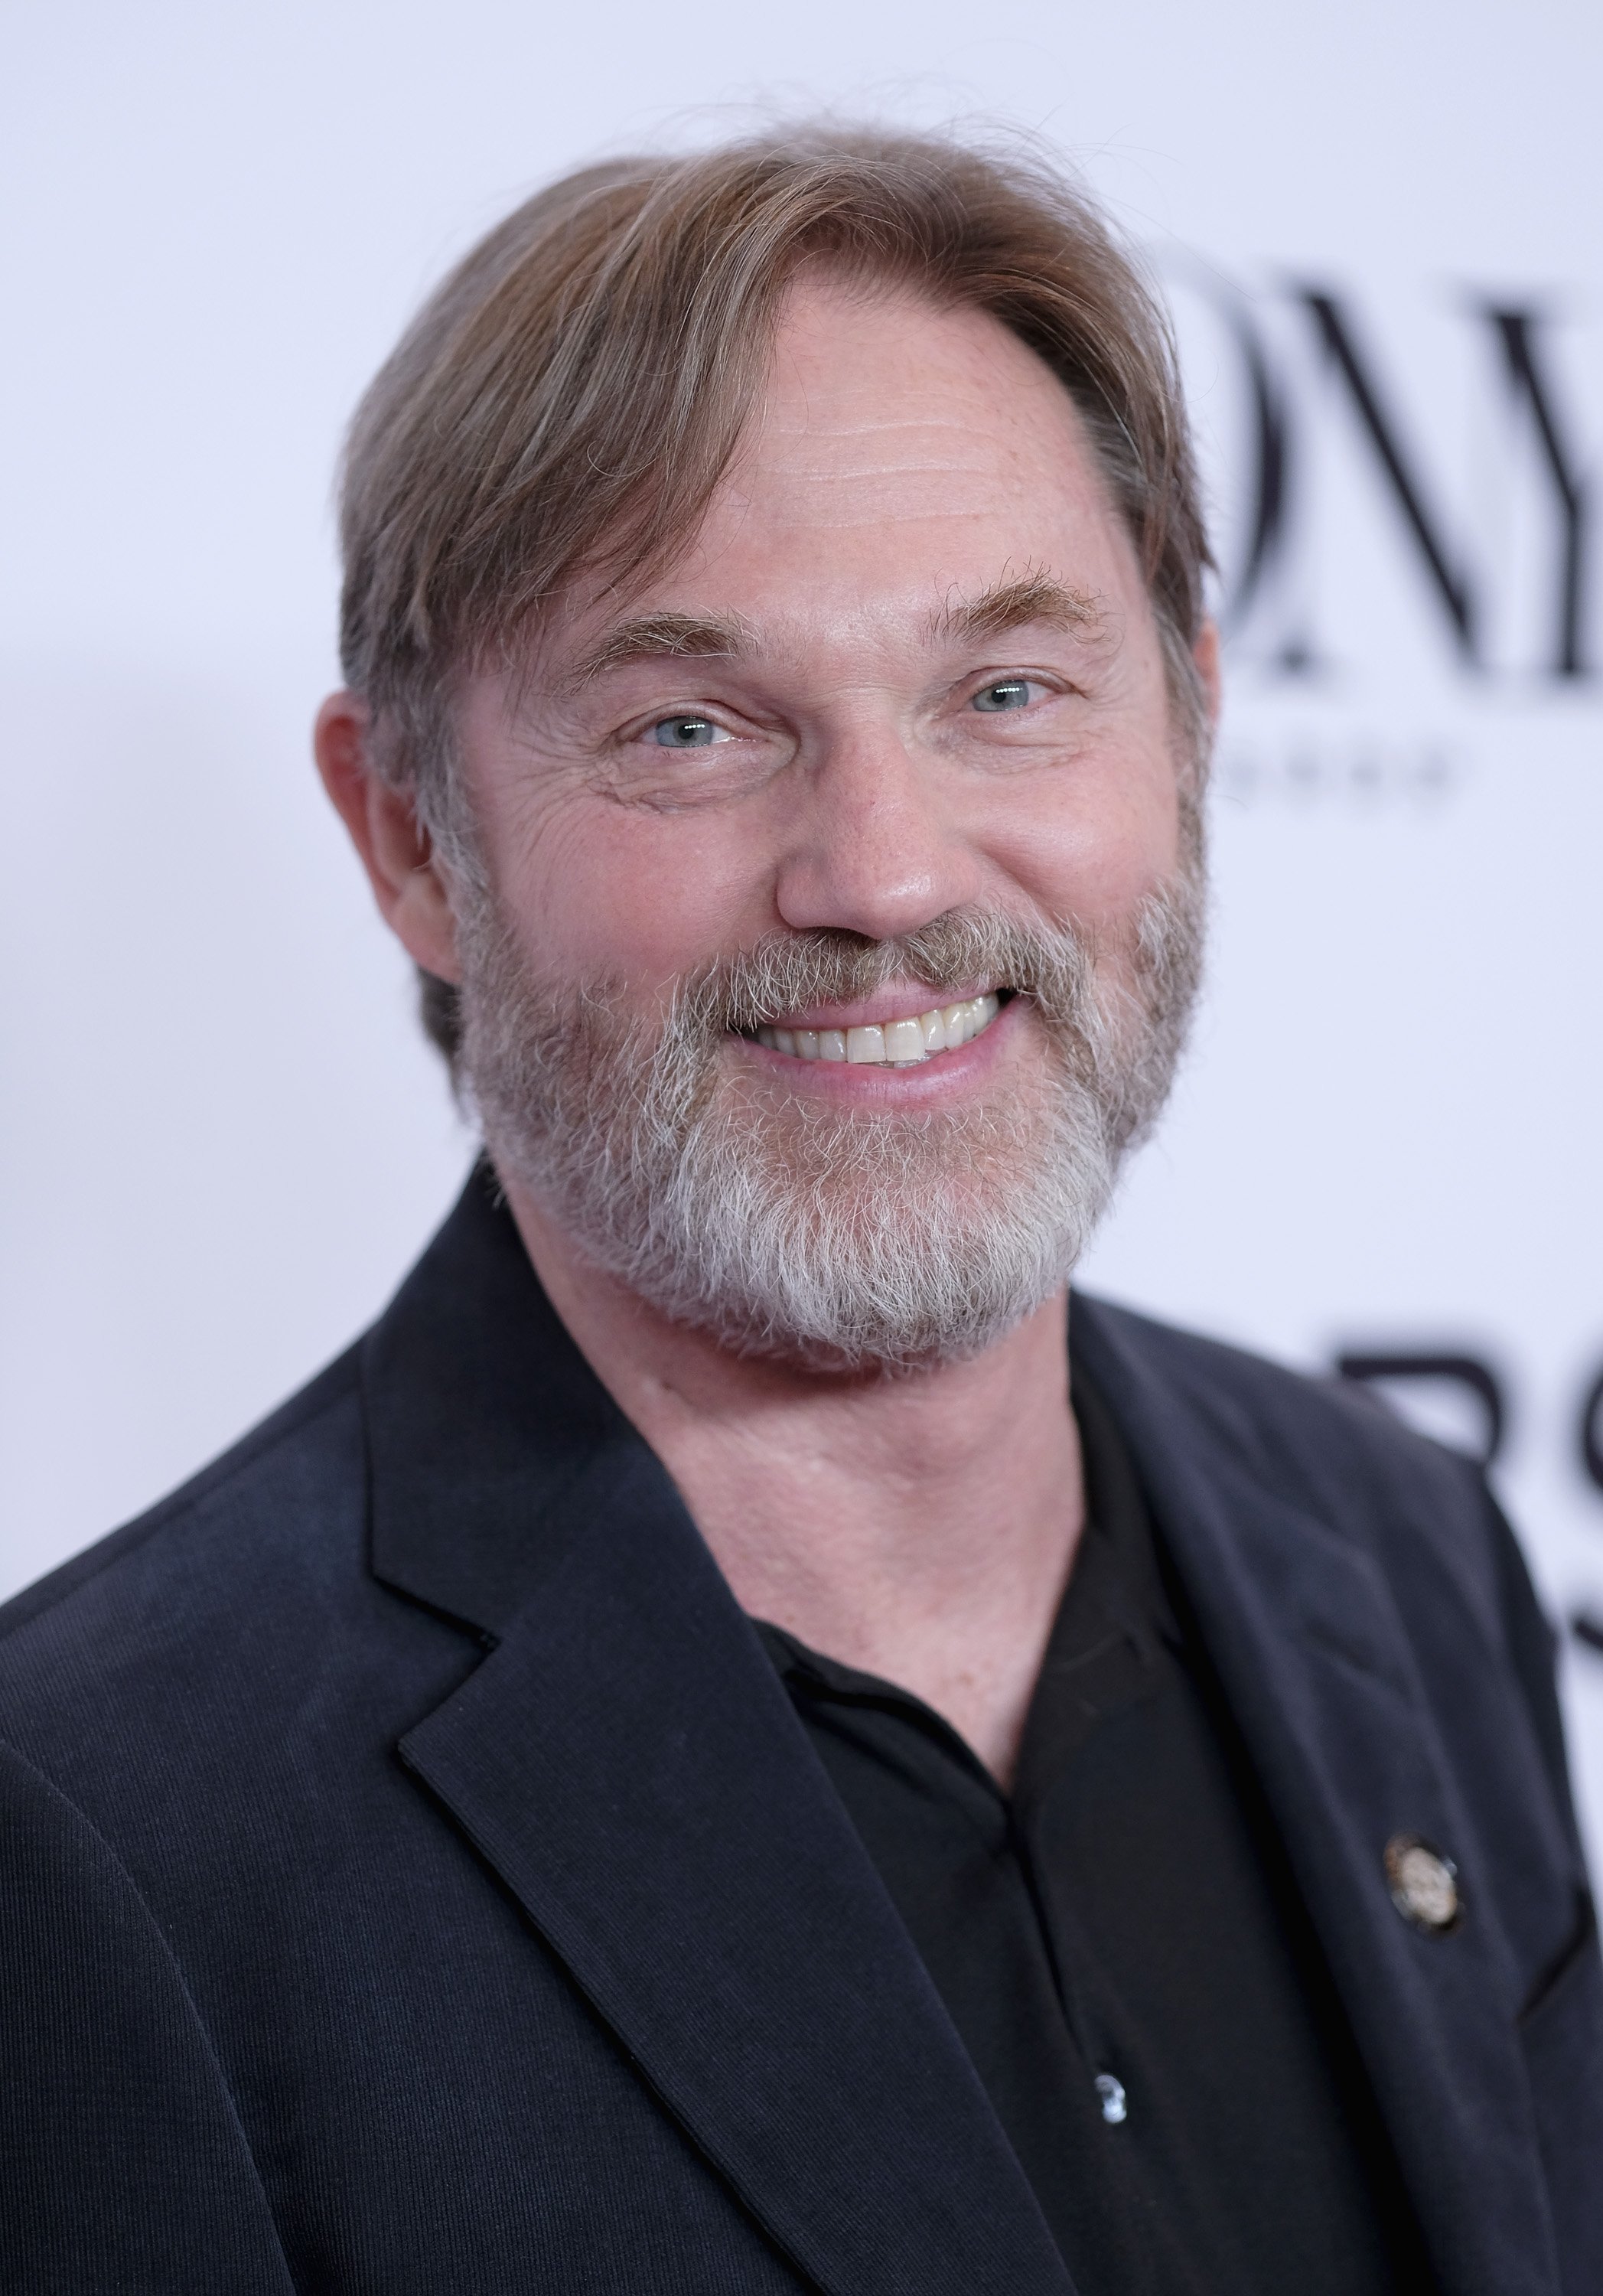 Richard Thomas at the 2017 Tony Awards Meet The Nominees Press Junket on May 3, 2017 in New York City. | Photo: Getty Images